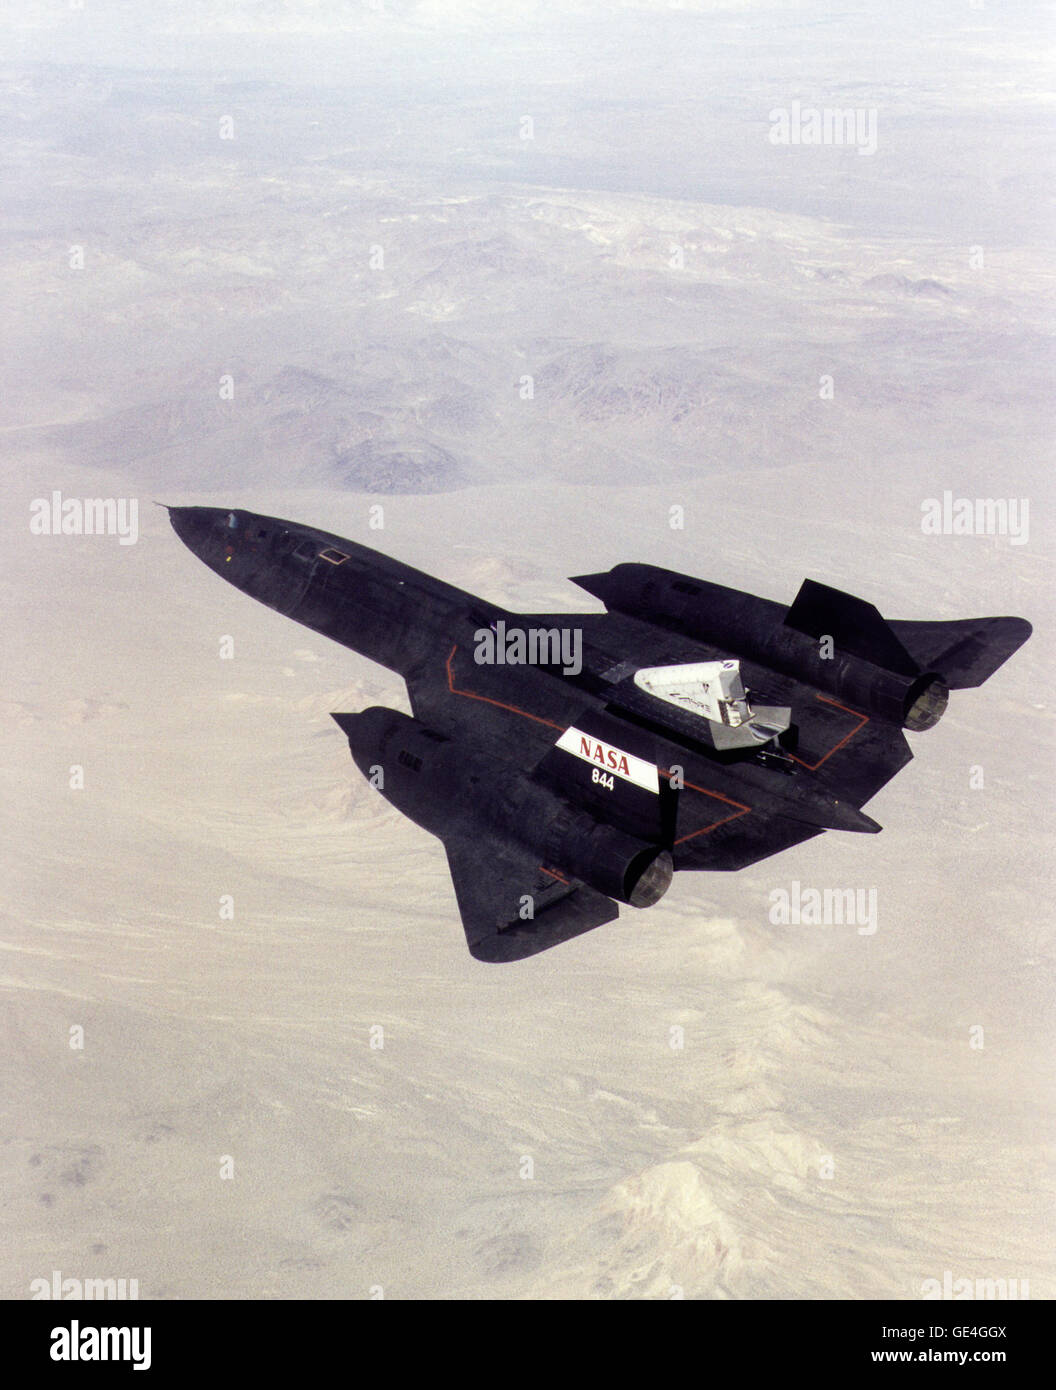 (October 31, 1997) A NASA SR-71 successfully completed its first flight October 31, 1997 as part of the NASA/Rocketdyne/Lockheed Martin Linear Aerospike SR-71 Experiment (LASRE) at NASA's Dryden Flight Research Center, Edwards, California. The SR-71 took off at 8:31 a.m. PST. The aircraft flew for one hour and fifty minutes, reaching a maximum speed of Mach 1.2 before landing at Edwards at 10:21 a.m. PST, successfully validating the SR-71/linear aerospike experiment configuration.   Image # : EC97-44295-108 Stock Photo